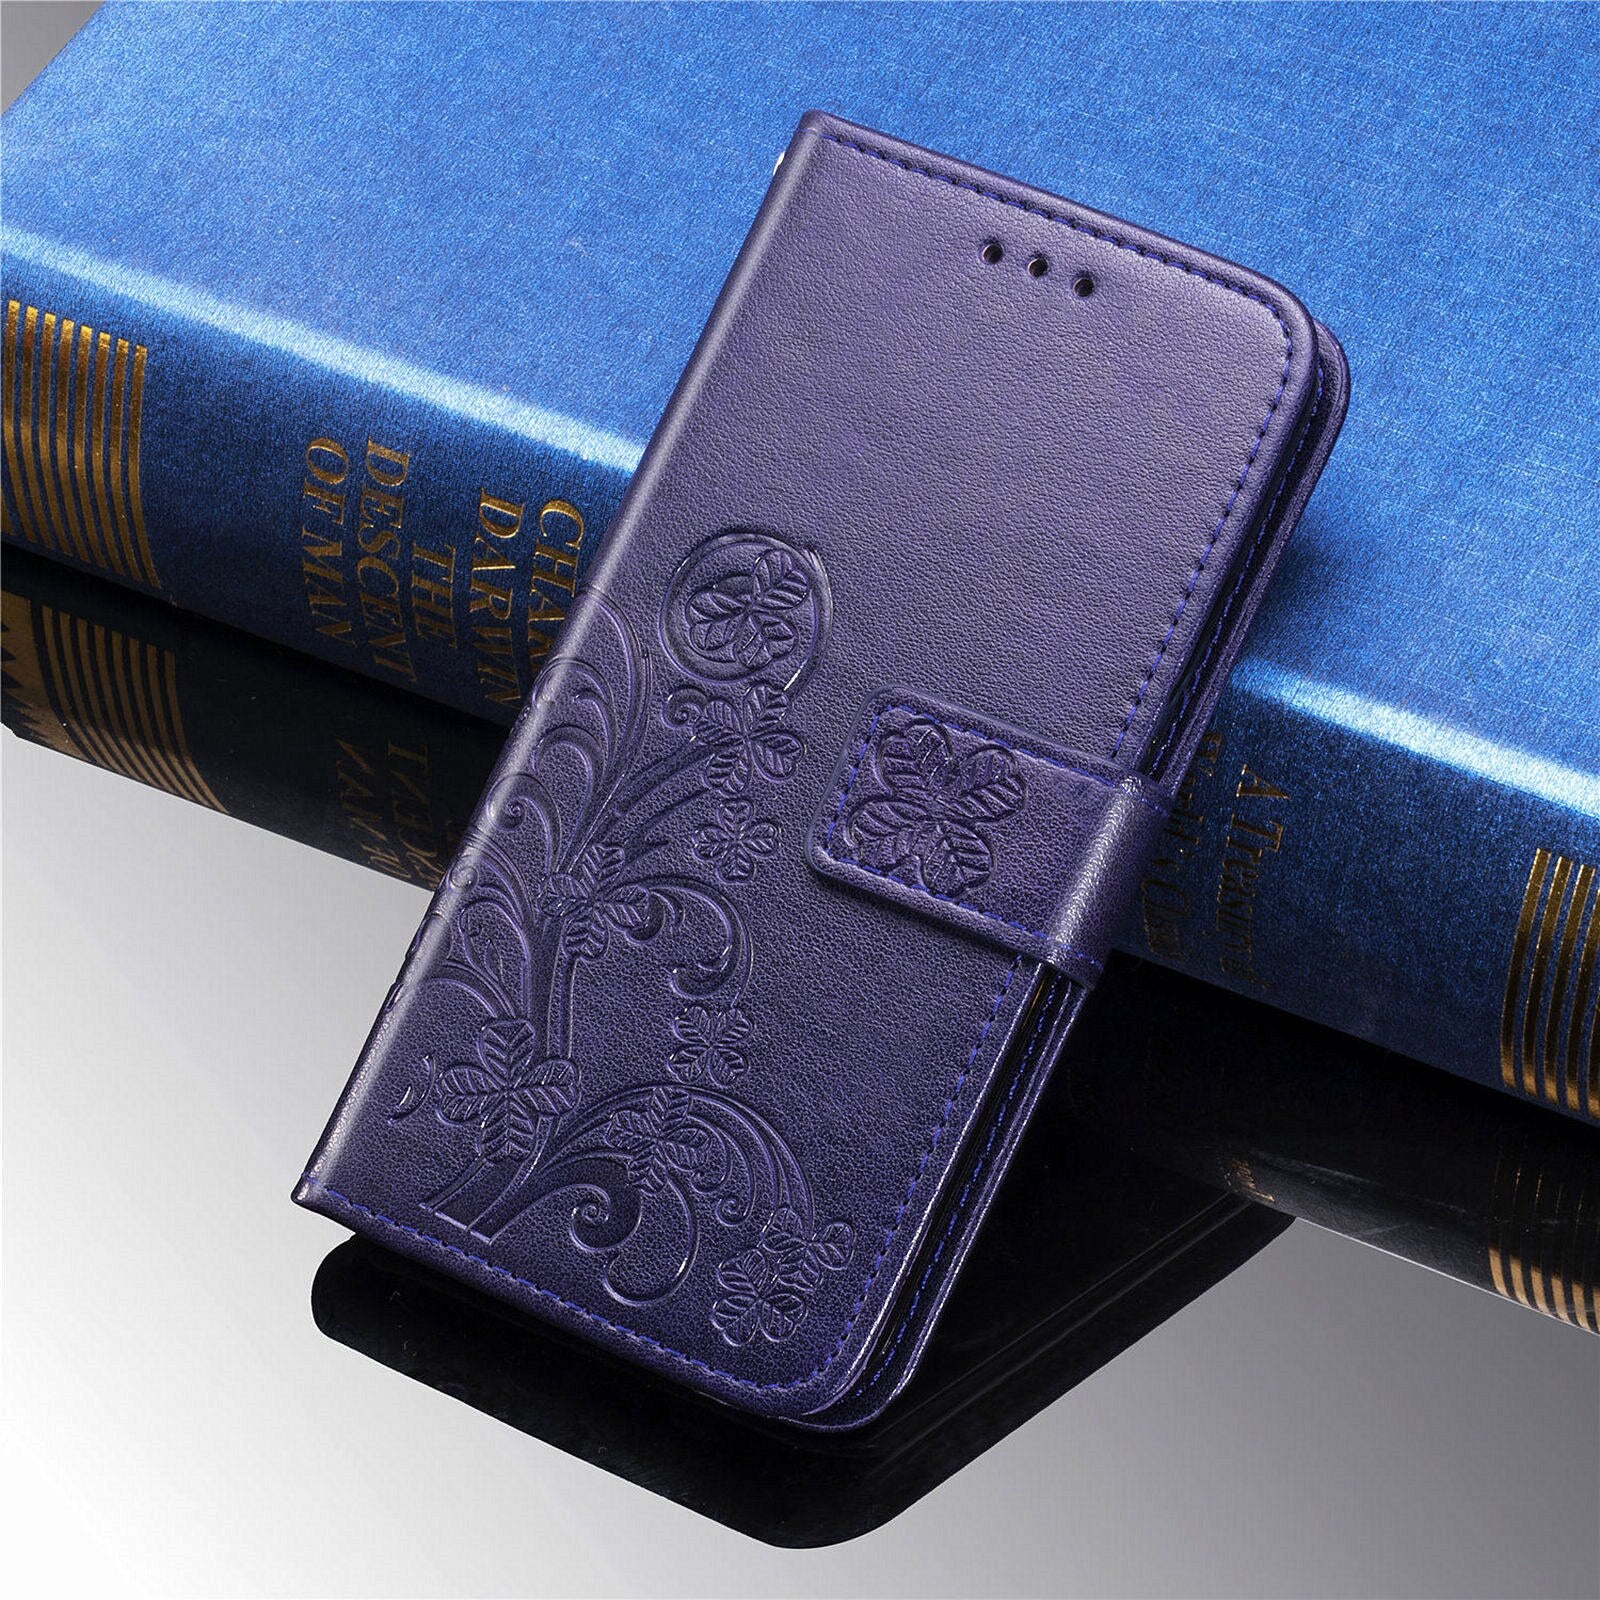 Embossed 3D Flower Case for Samsung Galaxy Z Fold 4 Fold 3 Leather Wallet Phone Case Bag Cover - 0 For Galaxy Z Fold 3 / Purple / United States Find Epic Store